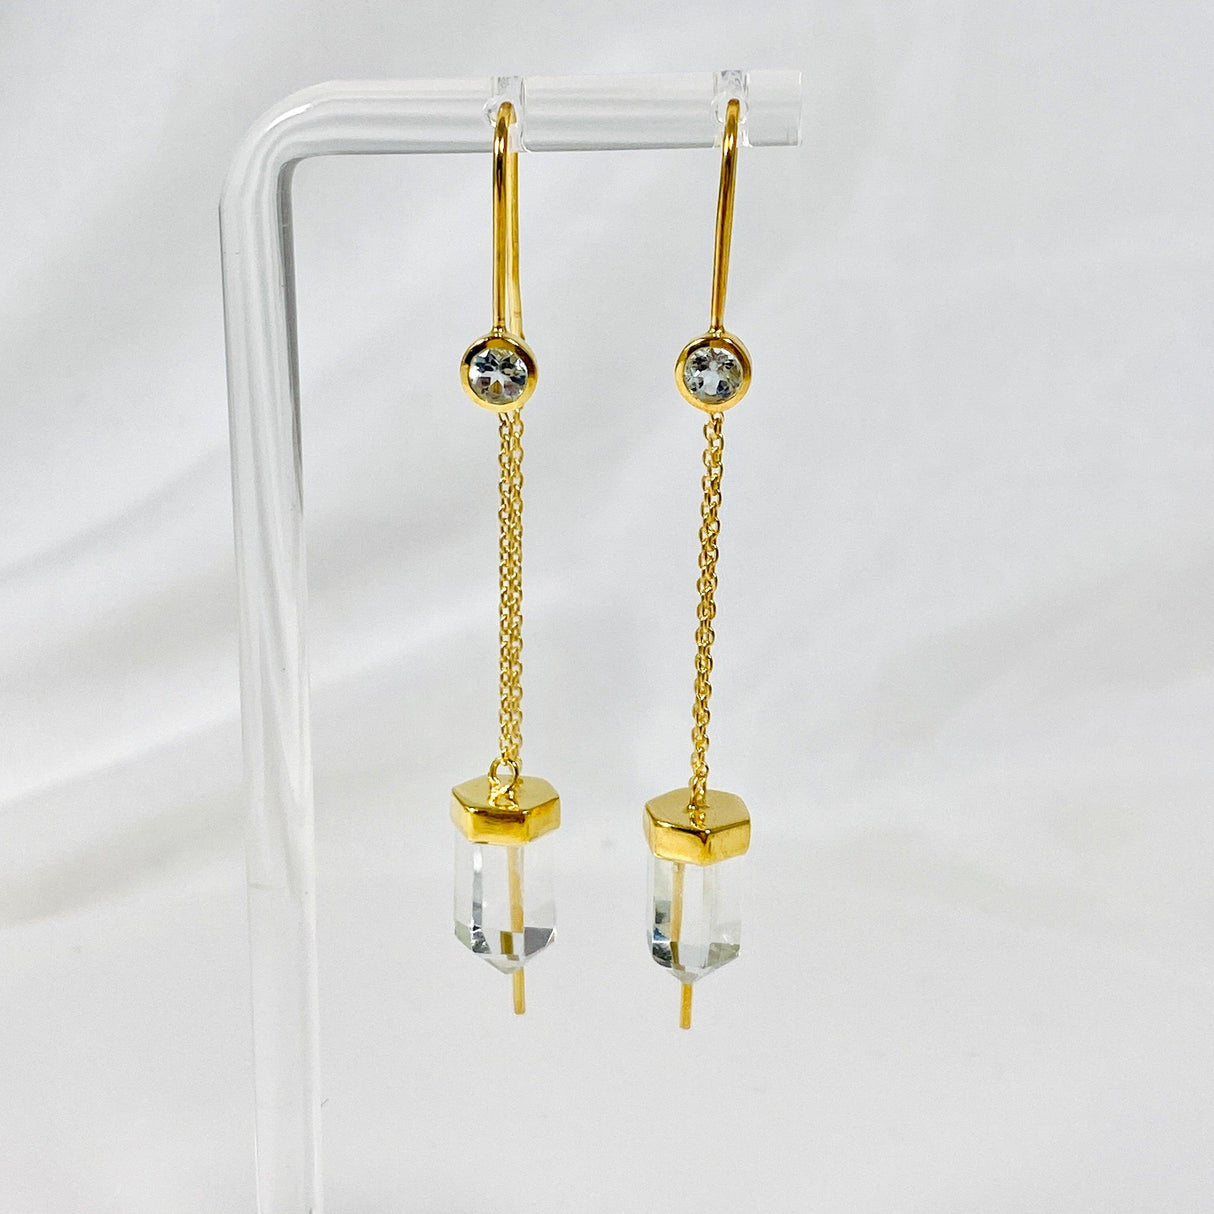 Gemstone and Gold Plated Thread Earrings - Nature's Magick